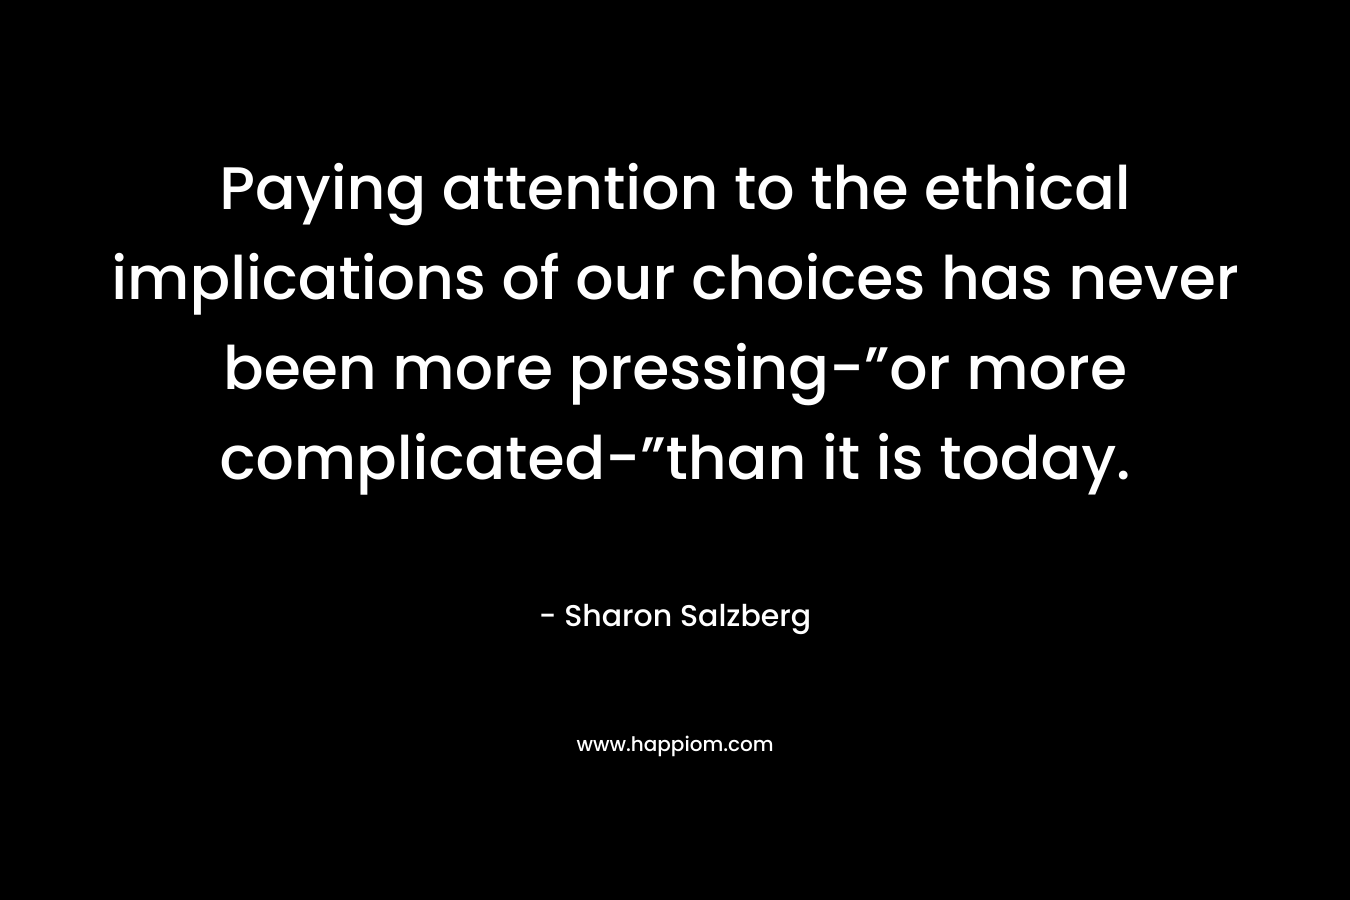 Paying attention to the ethical implications of our choices has never been more pressing-”or more complicated-”than it is today. – Sharon Salzberg